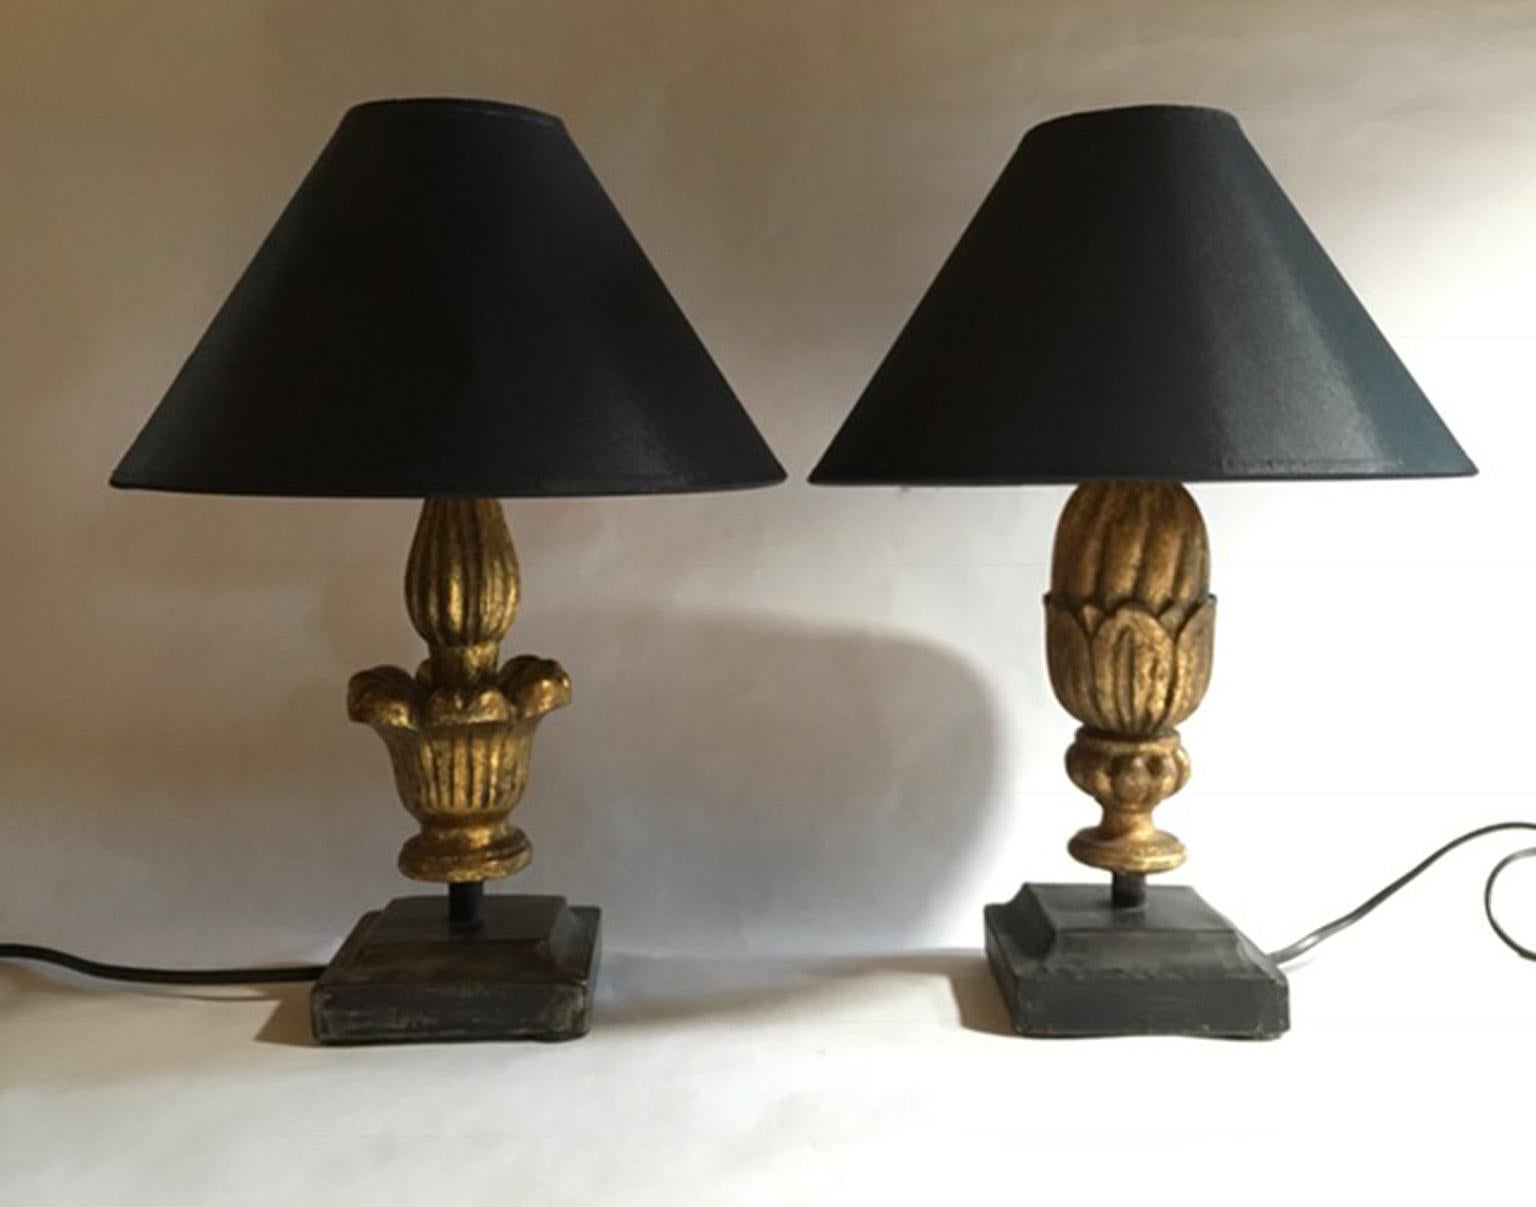 Louis XV style French pair of table lamps in golden patinated wood with wrought iron bases

This an agreeable pair but with two different shape: color and dimensions are the same
but it's very modern to use different pieces put together. Perfect